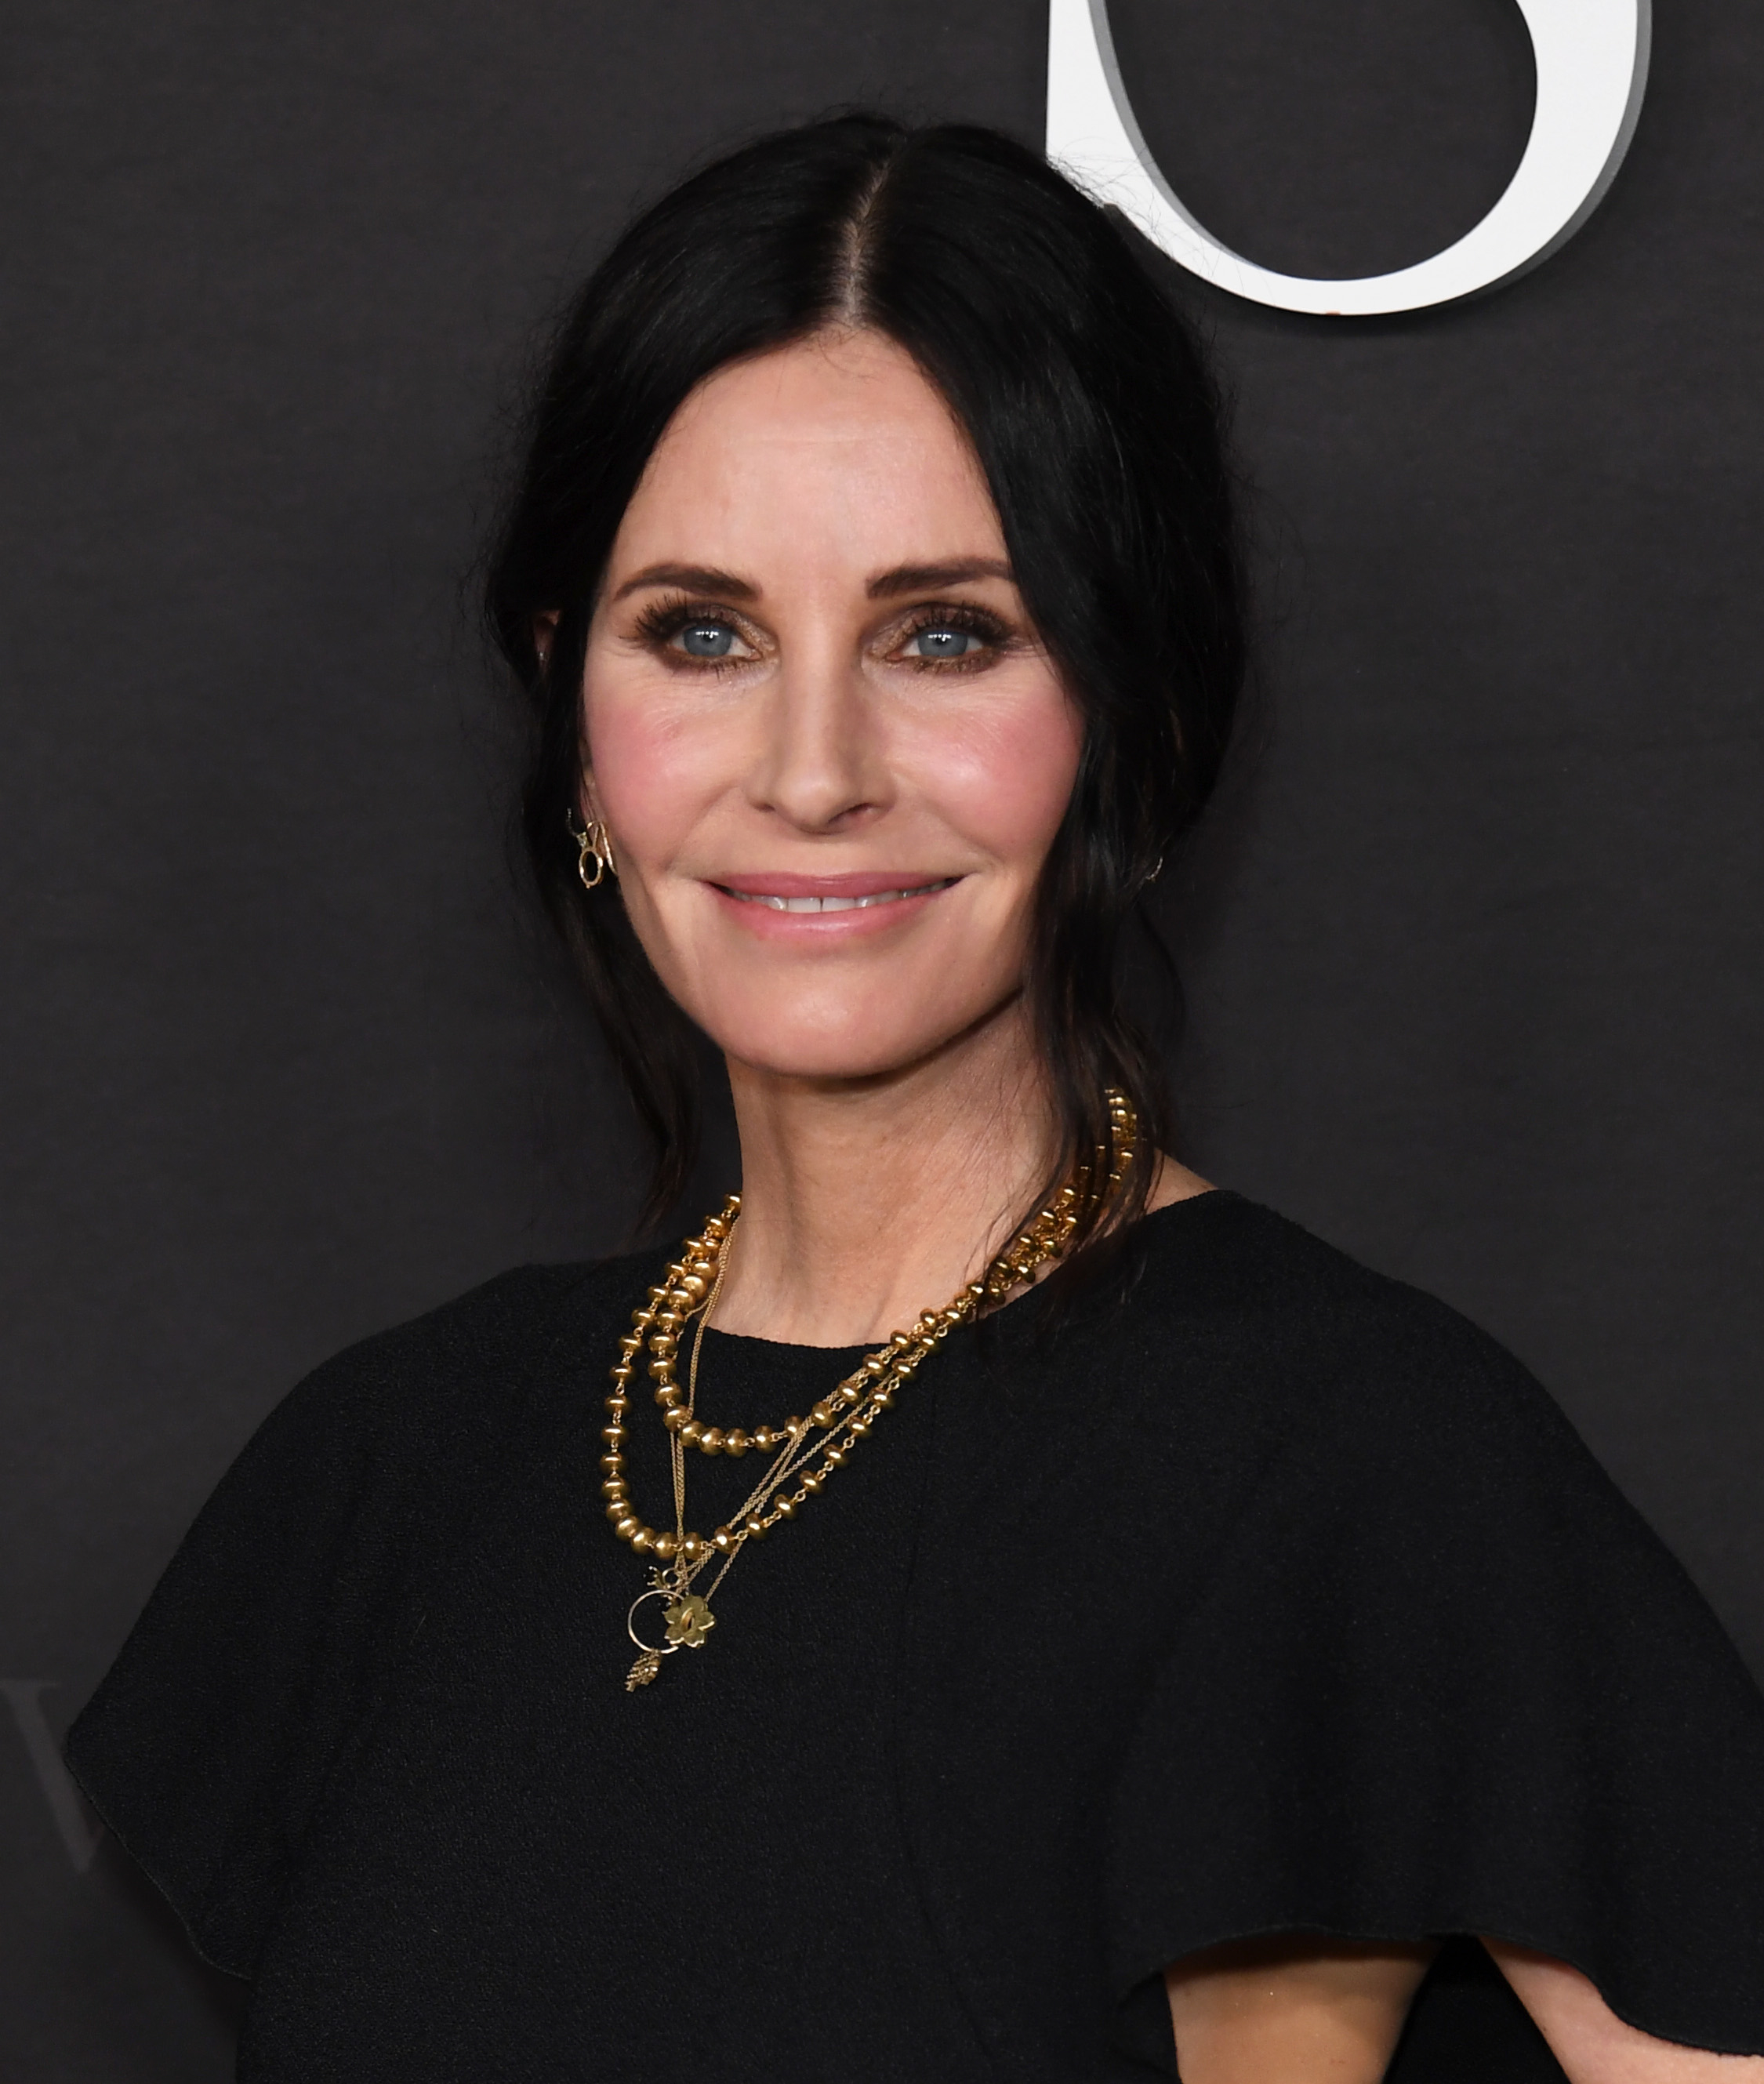 Courteney Cox in a outfit with layered necklaces, posing at an event